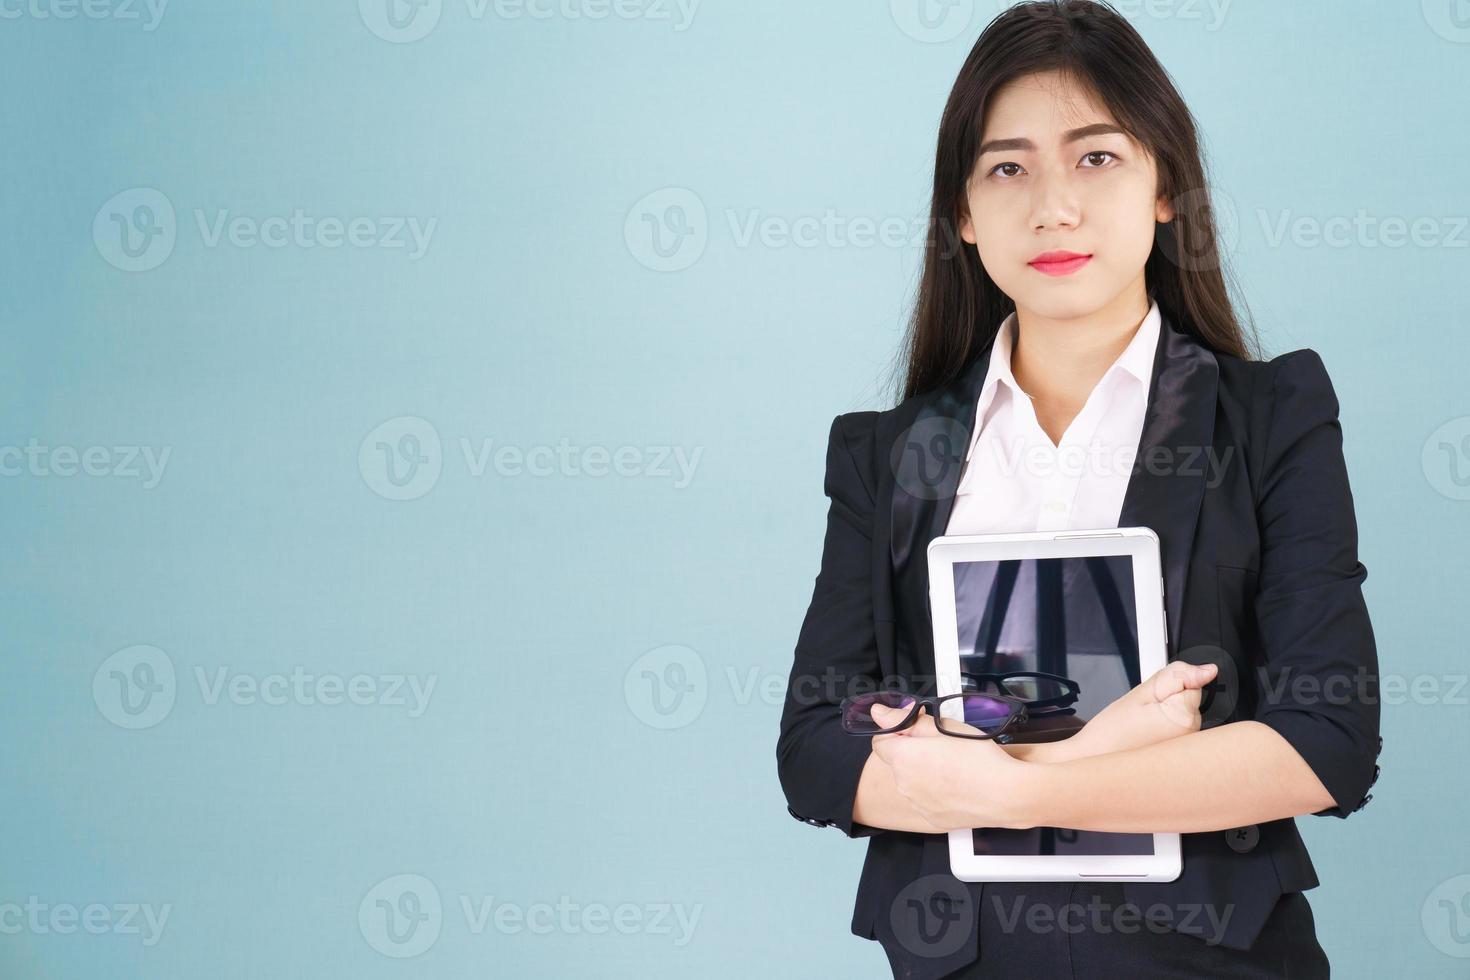 Young women standing in suit holding digital tablet photo